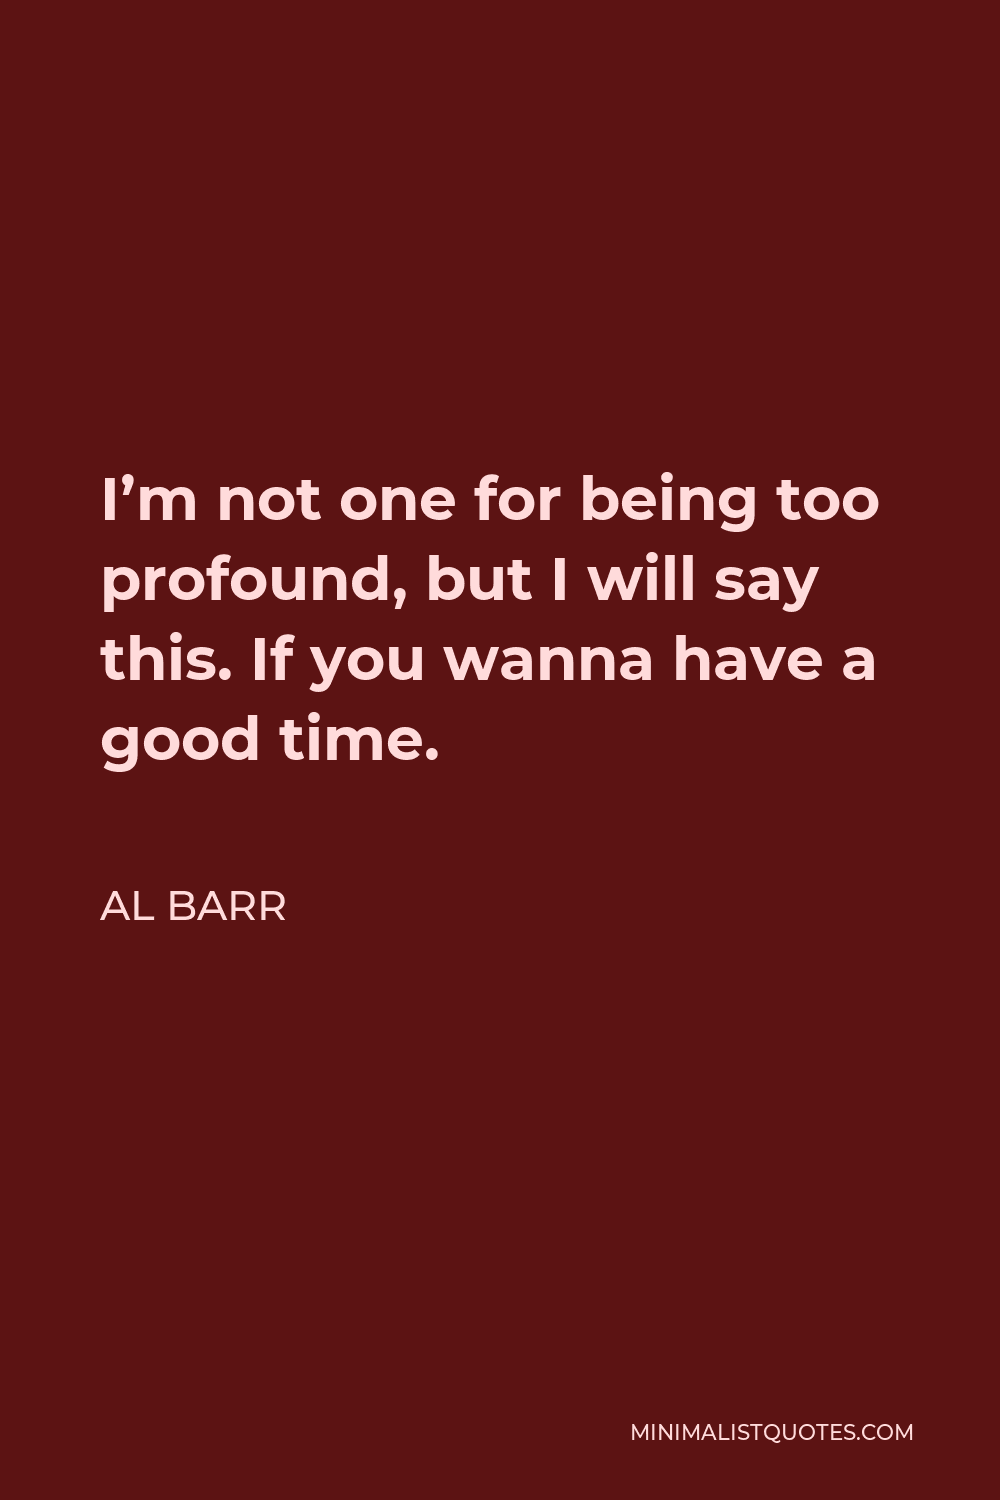 Al Barr Quote - I’m not one for being too profound, but I will say this. If you wanna have a good time.